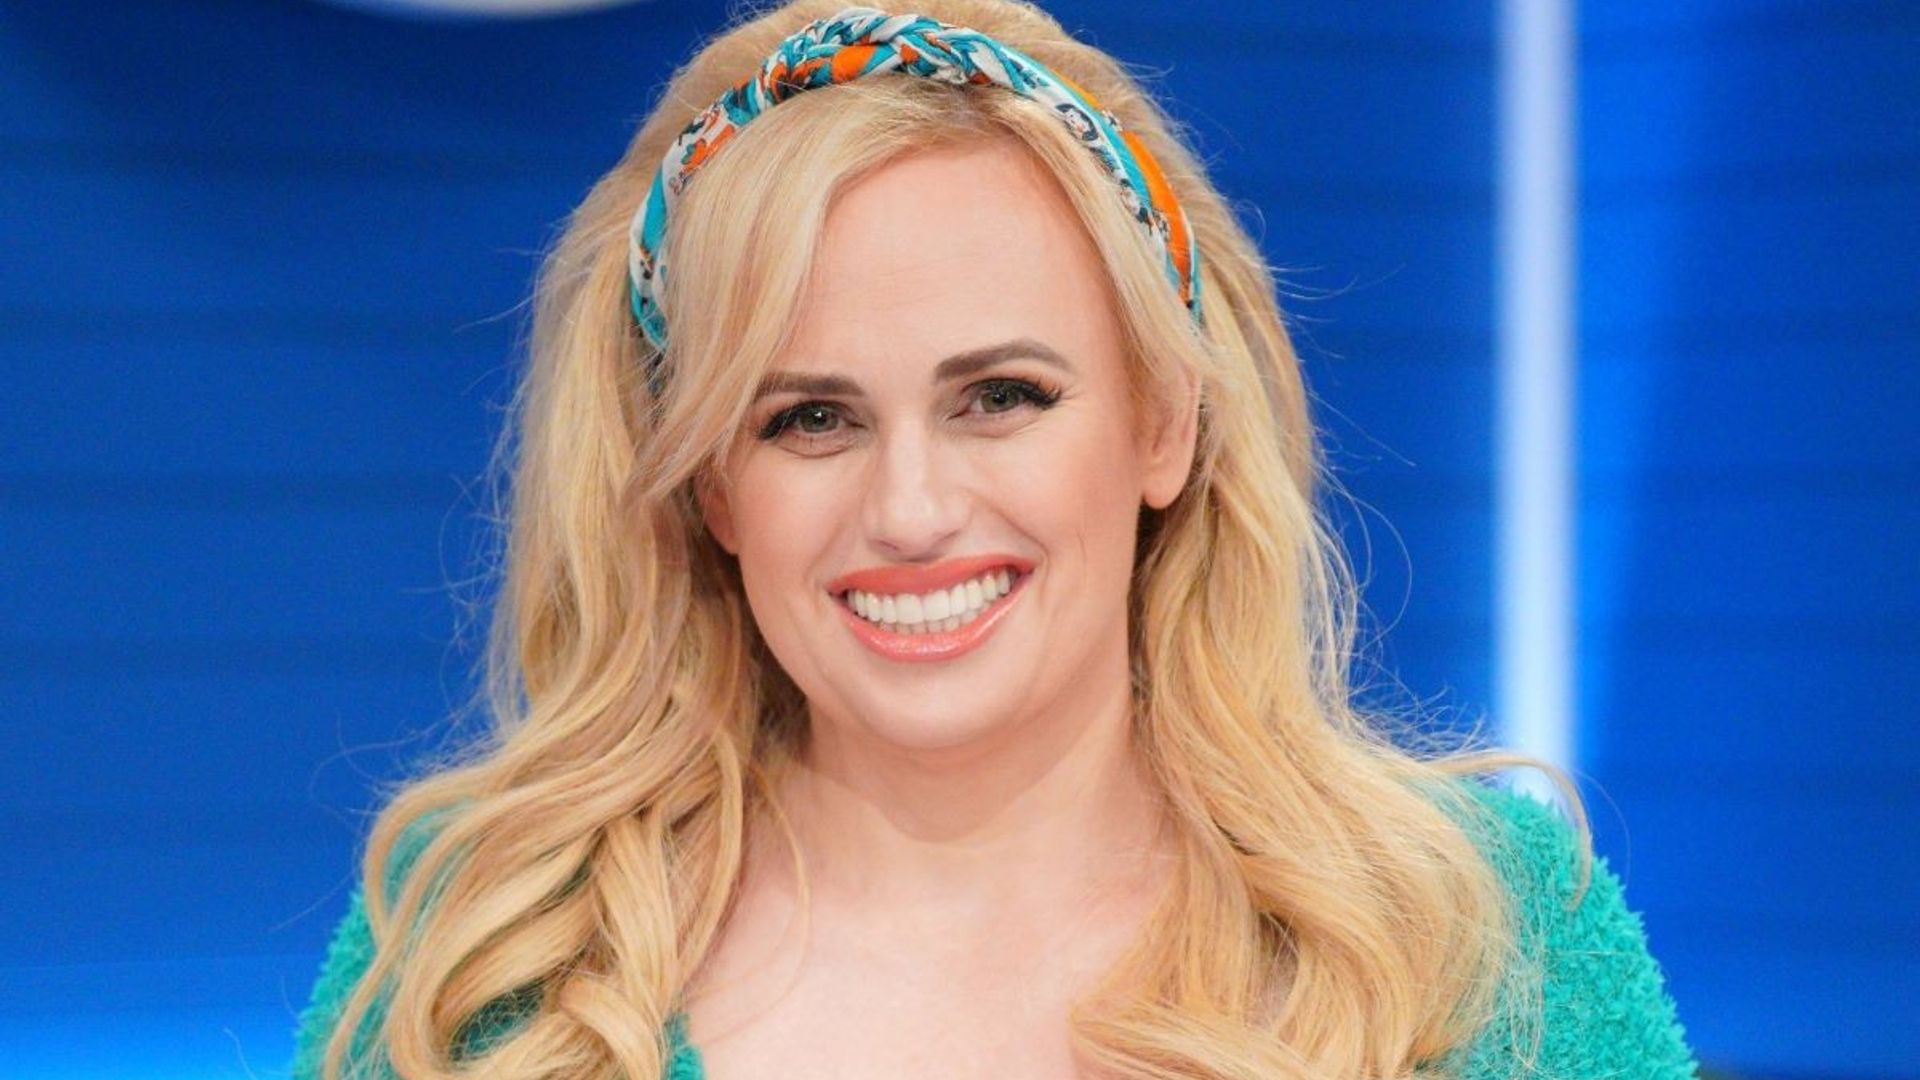 Rebel Wilson's fans react as she rocks waist-cinching workout outfit for special event